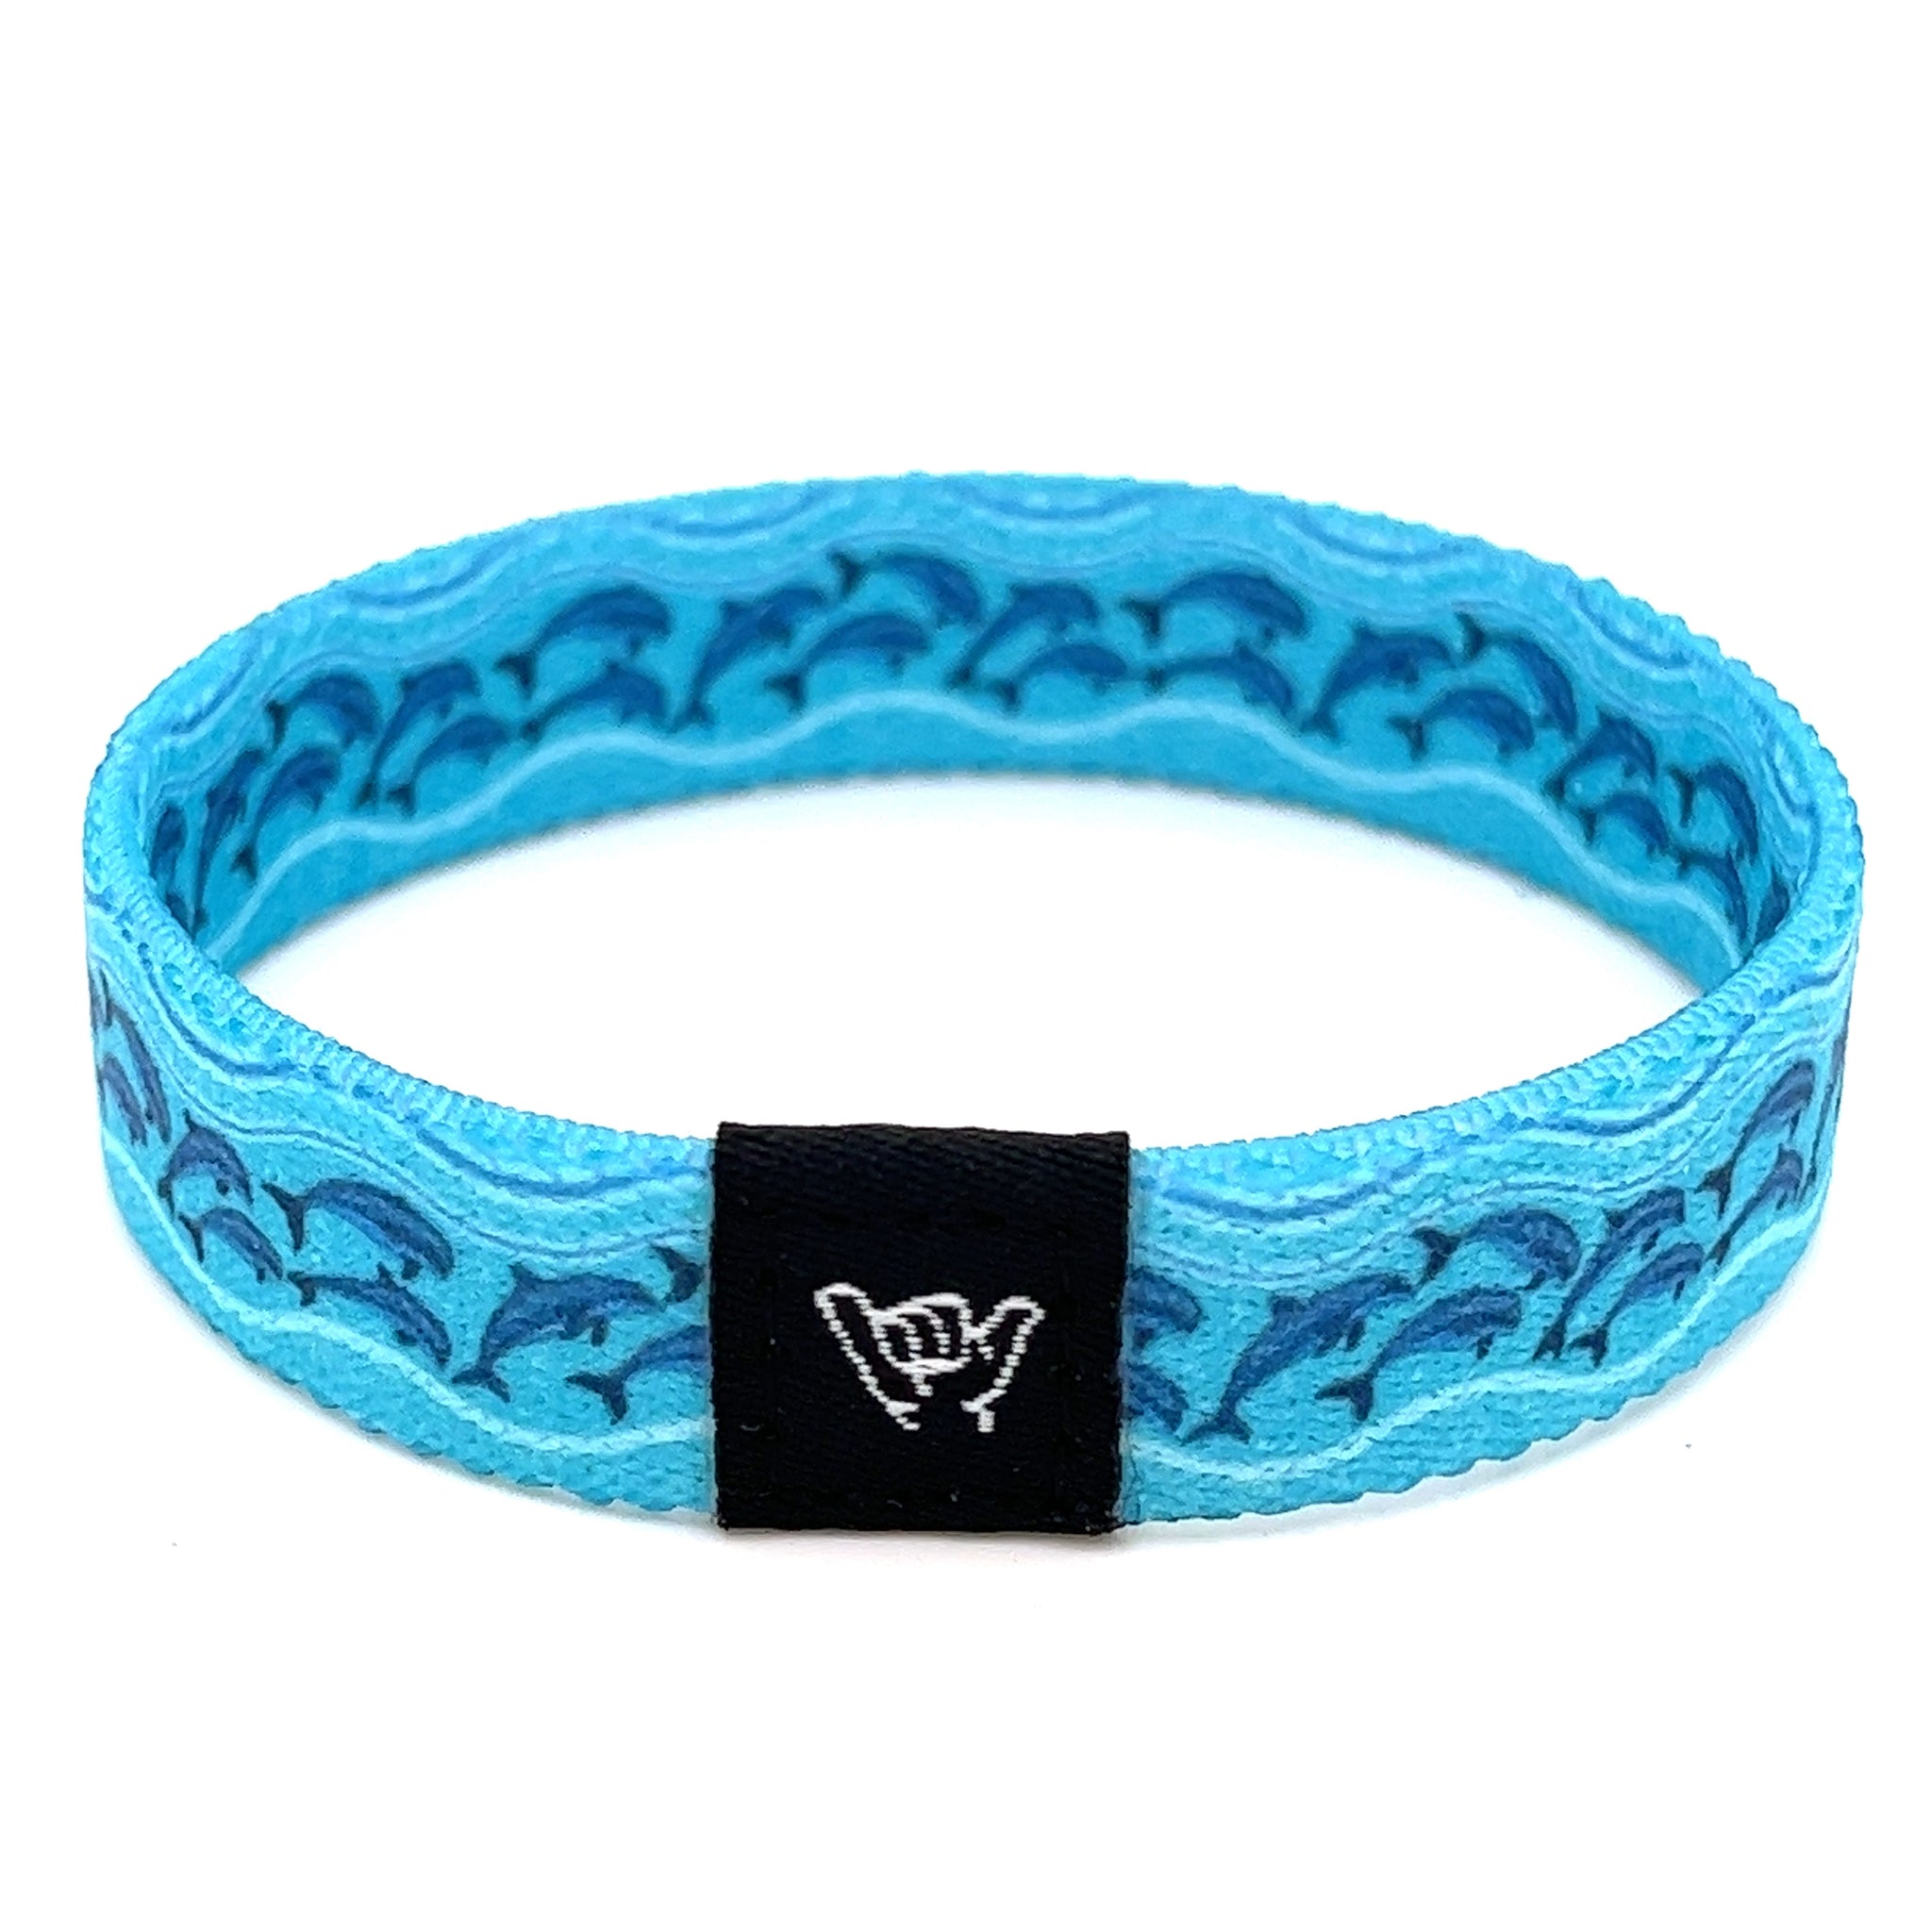 School of Dolphins Wristband Bracelet – Hang Loose Bands